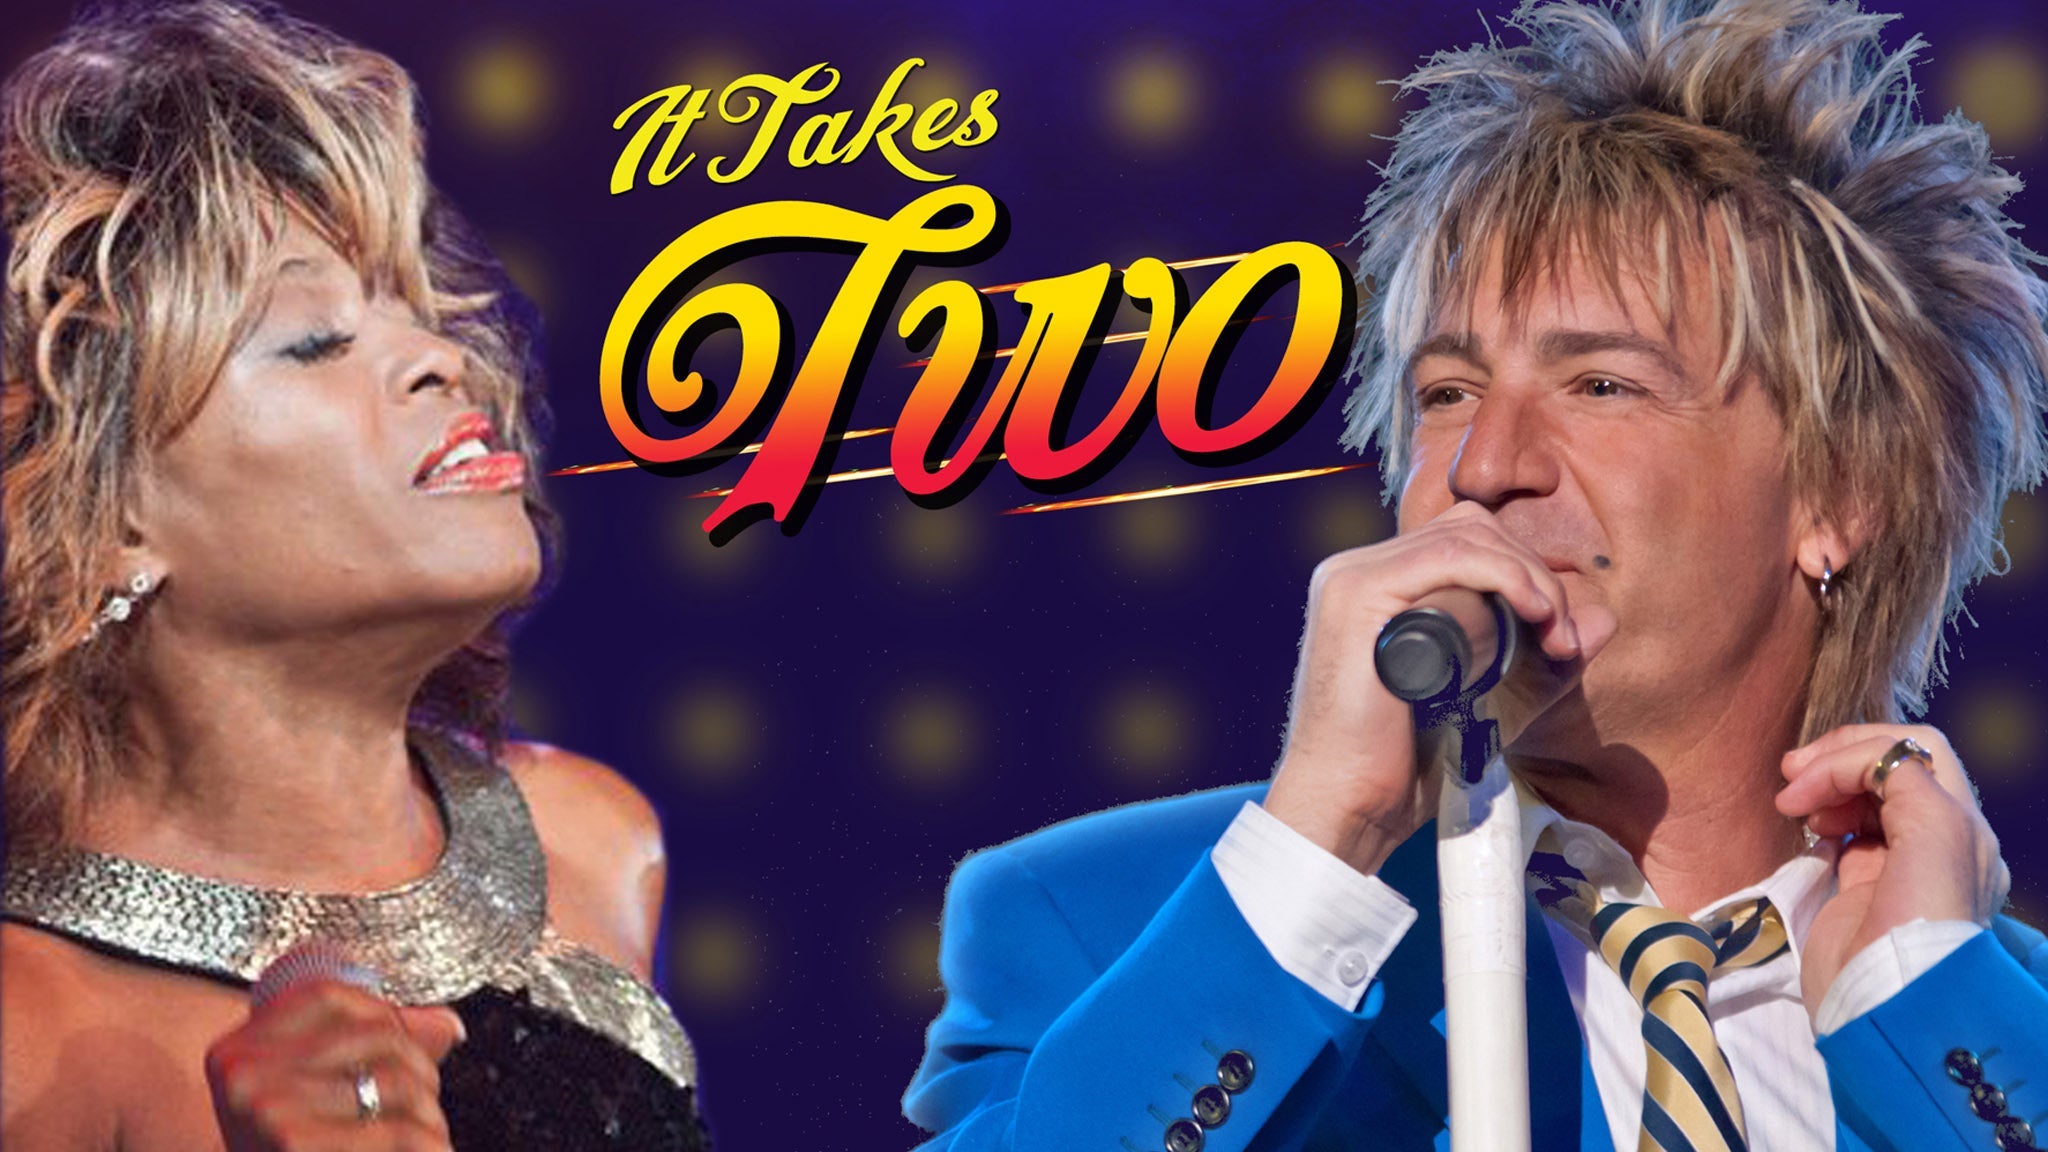 It Takes Two - Tribute to Tina Turner & Rod Stewart in Winnipeg promo photo for Club Card & Radio presale offer code